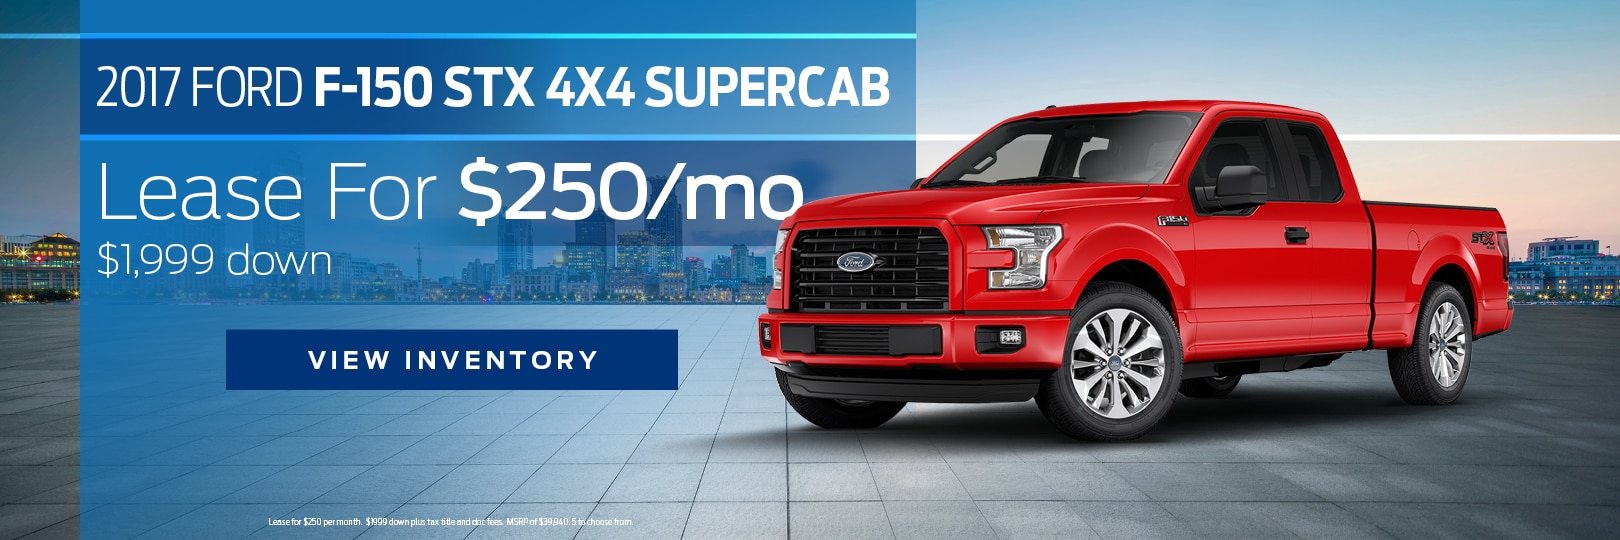 Ford F150 Lease Deals Elyria OH Mike Bass Ford Specials